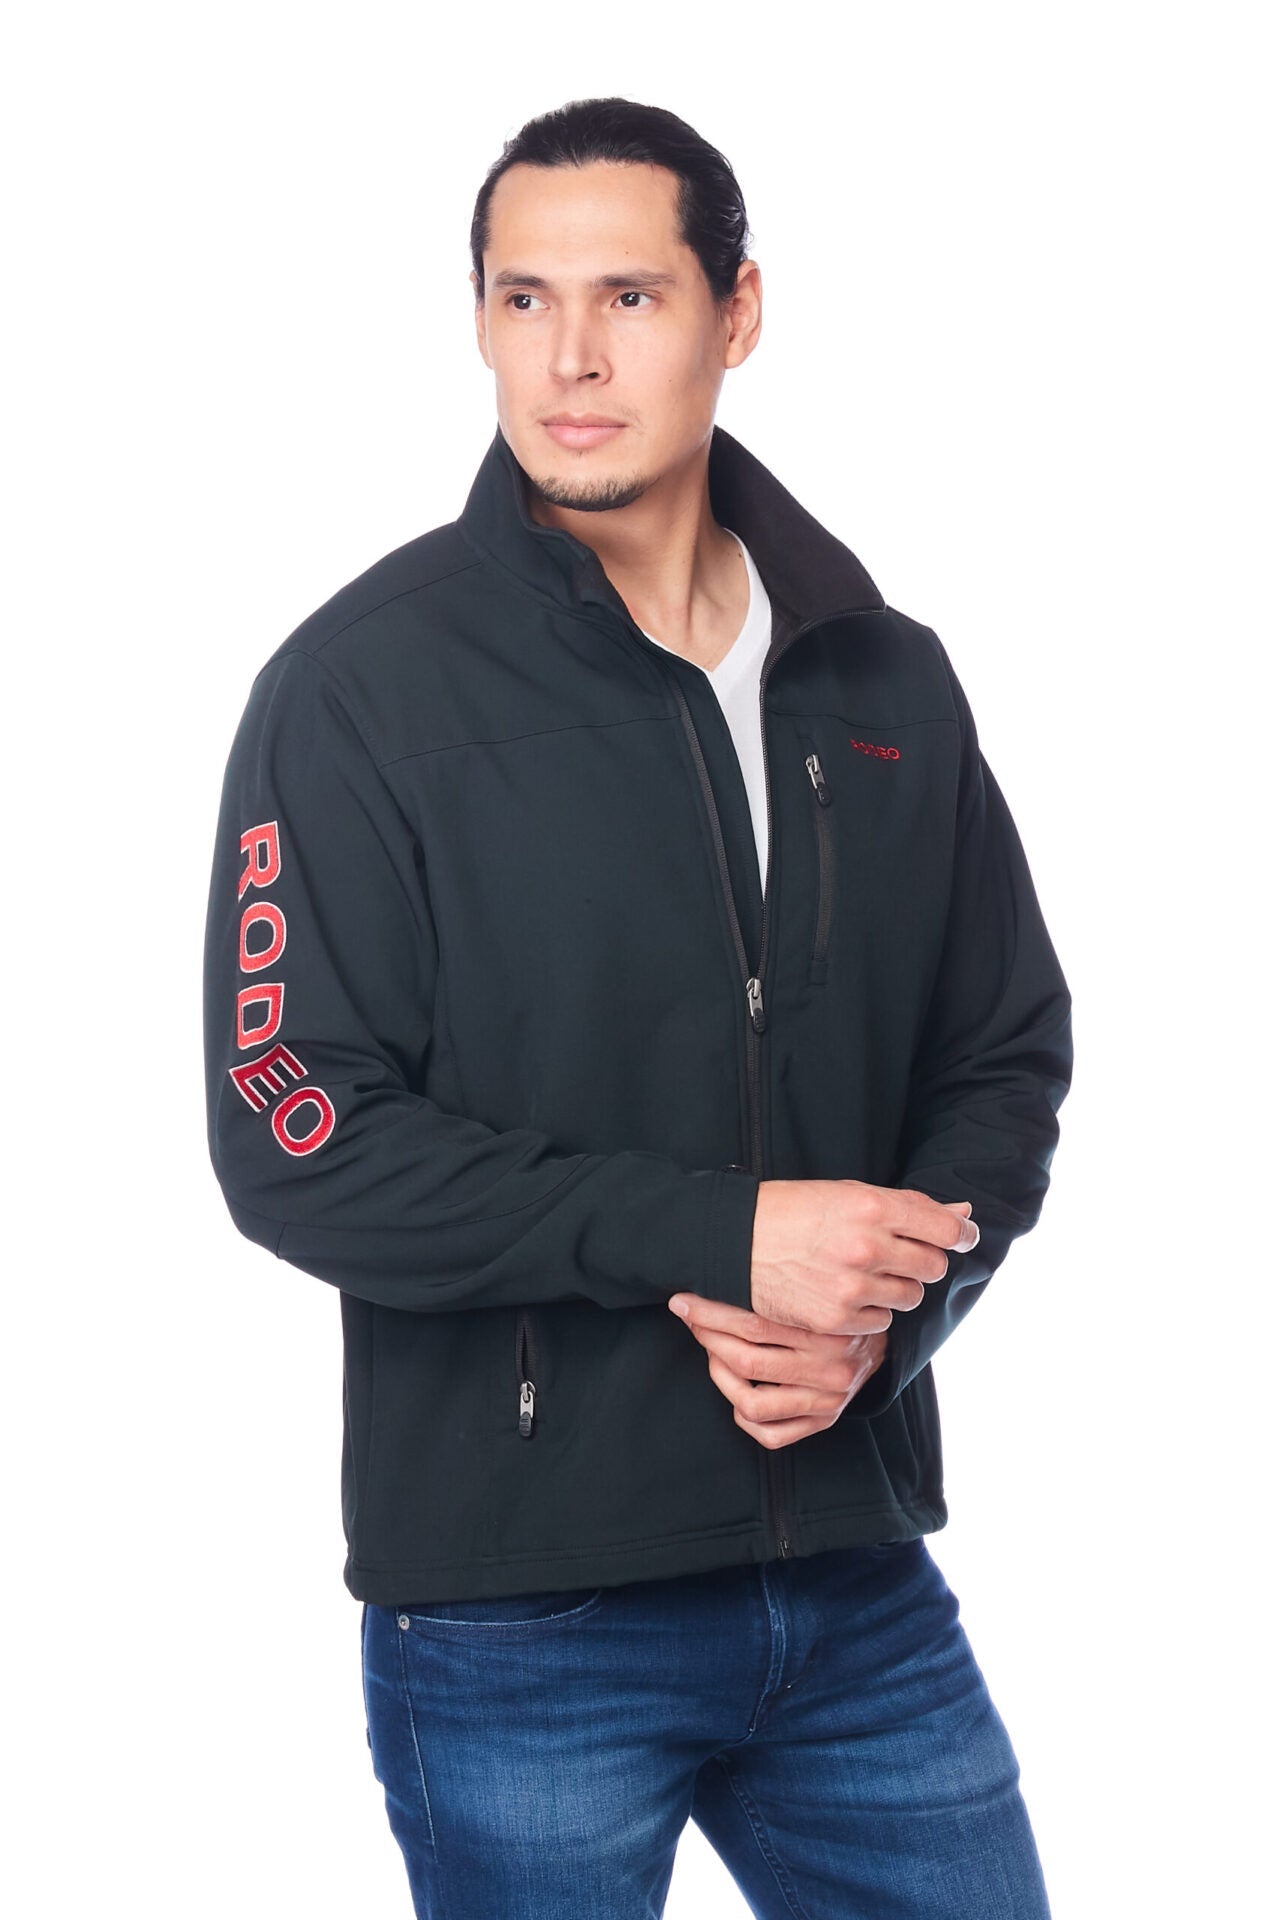  Men's High-Quality Soft Shell Bonded Jacket With Contrast Fleeceand Rodeo Embroidery-BLACK-RED